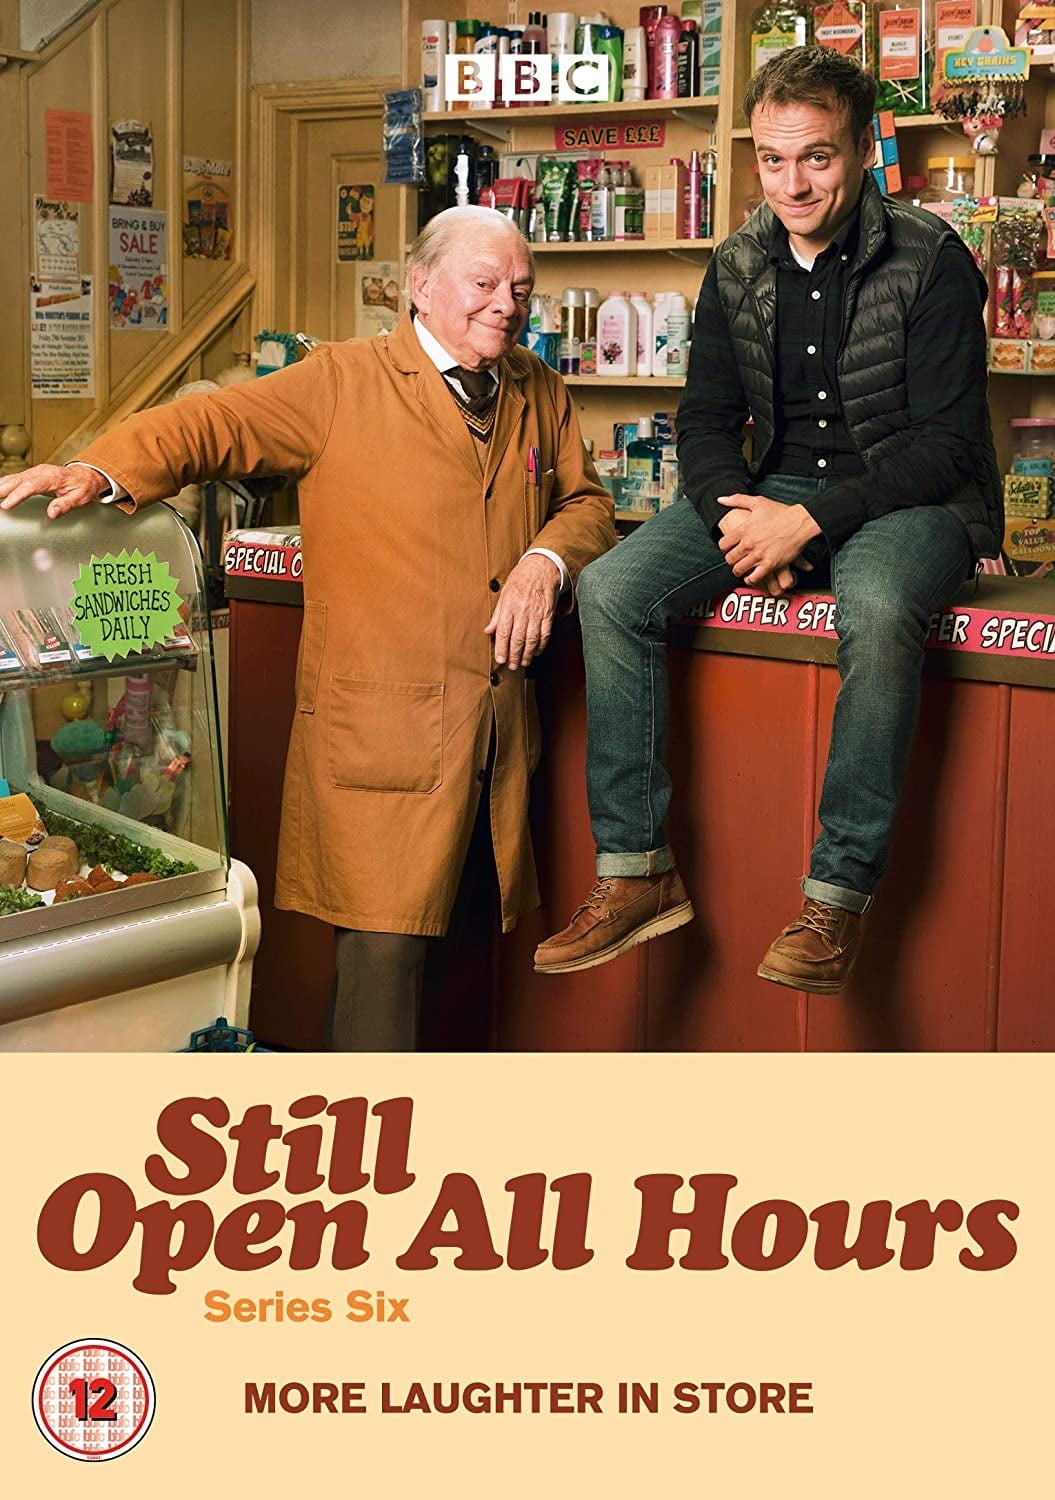 Still Open All Hours TV Shows About Workplace Comedy